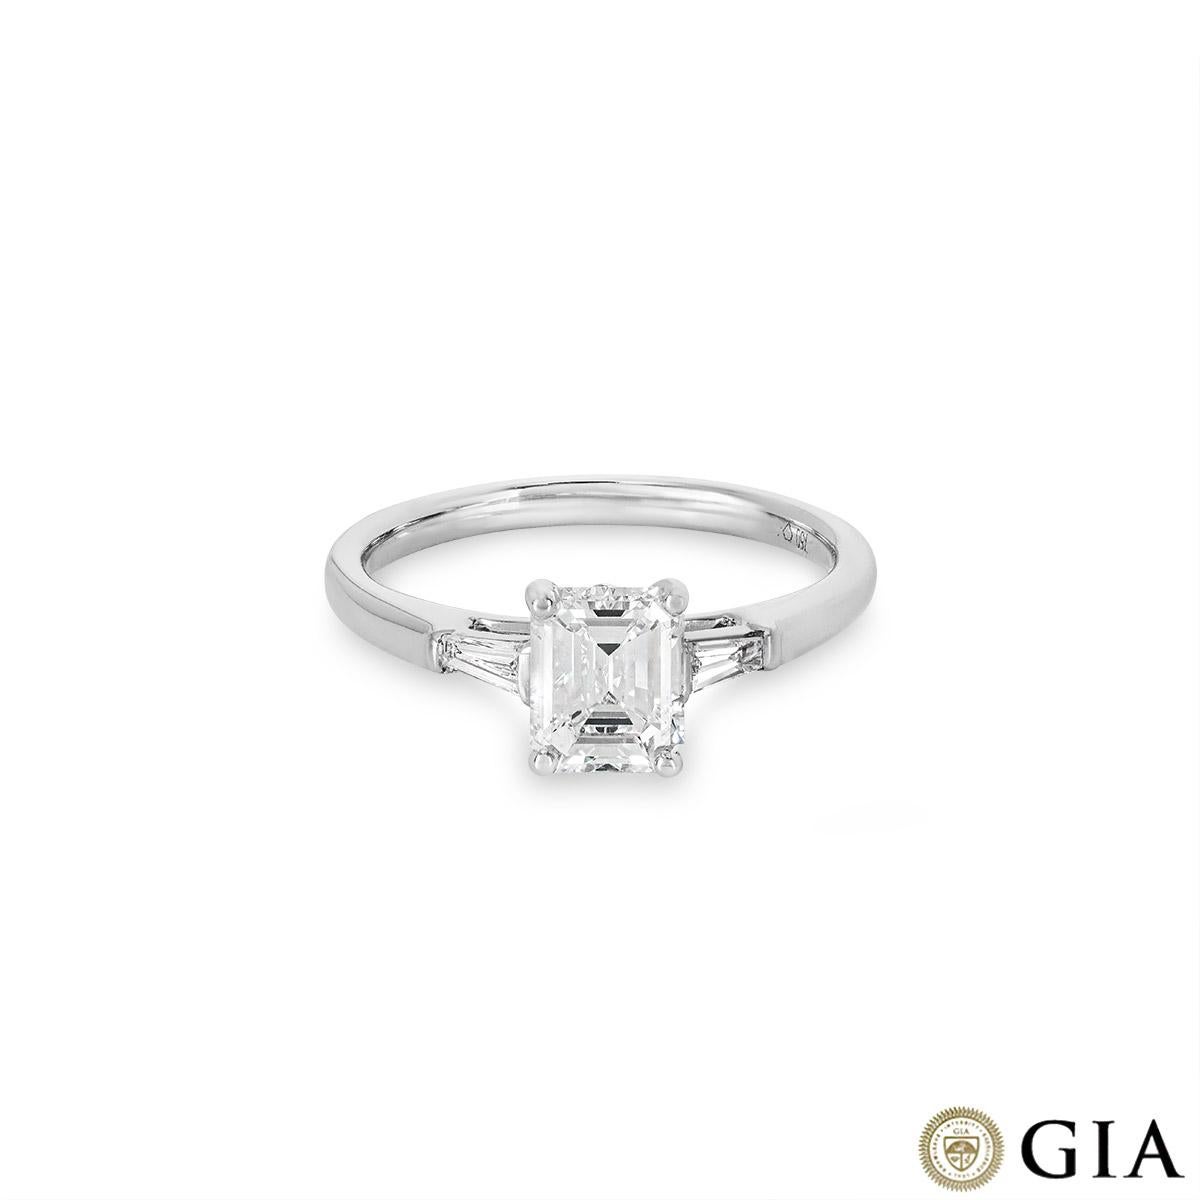 GIA Certified White Gold Emerald Cut Diamond Ring 1.01ct E/SI1 In New Condition For Sale In London, GB